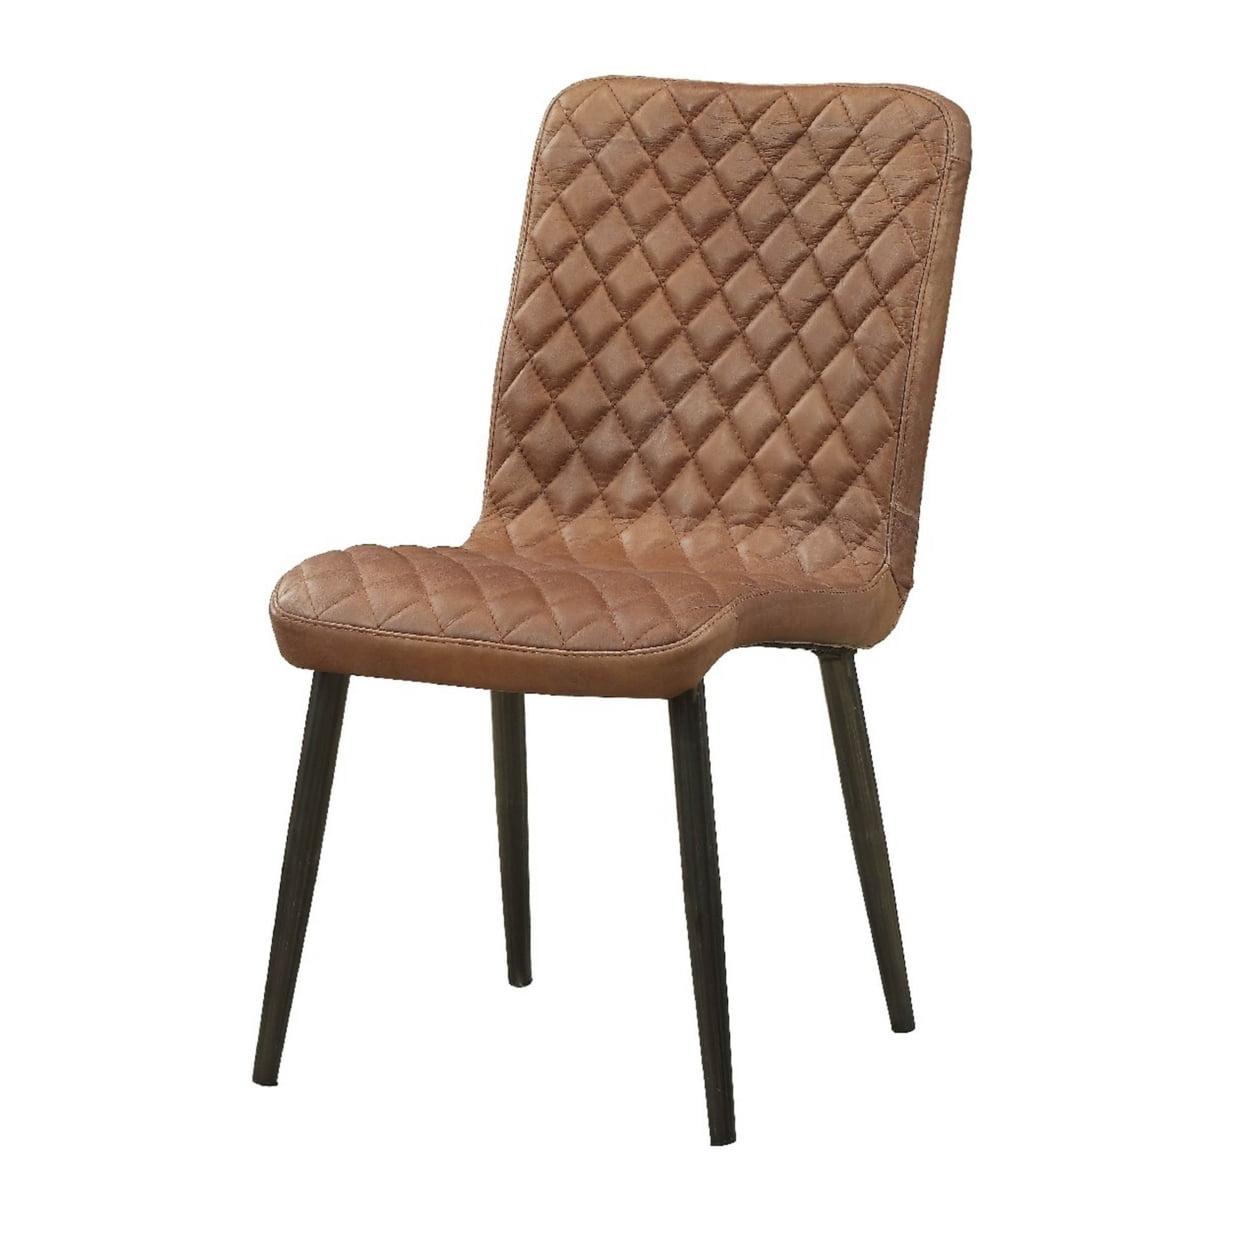 Low-Profile Vintage Chocolate Leather Side Chair with Metal Legs